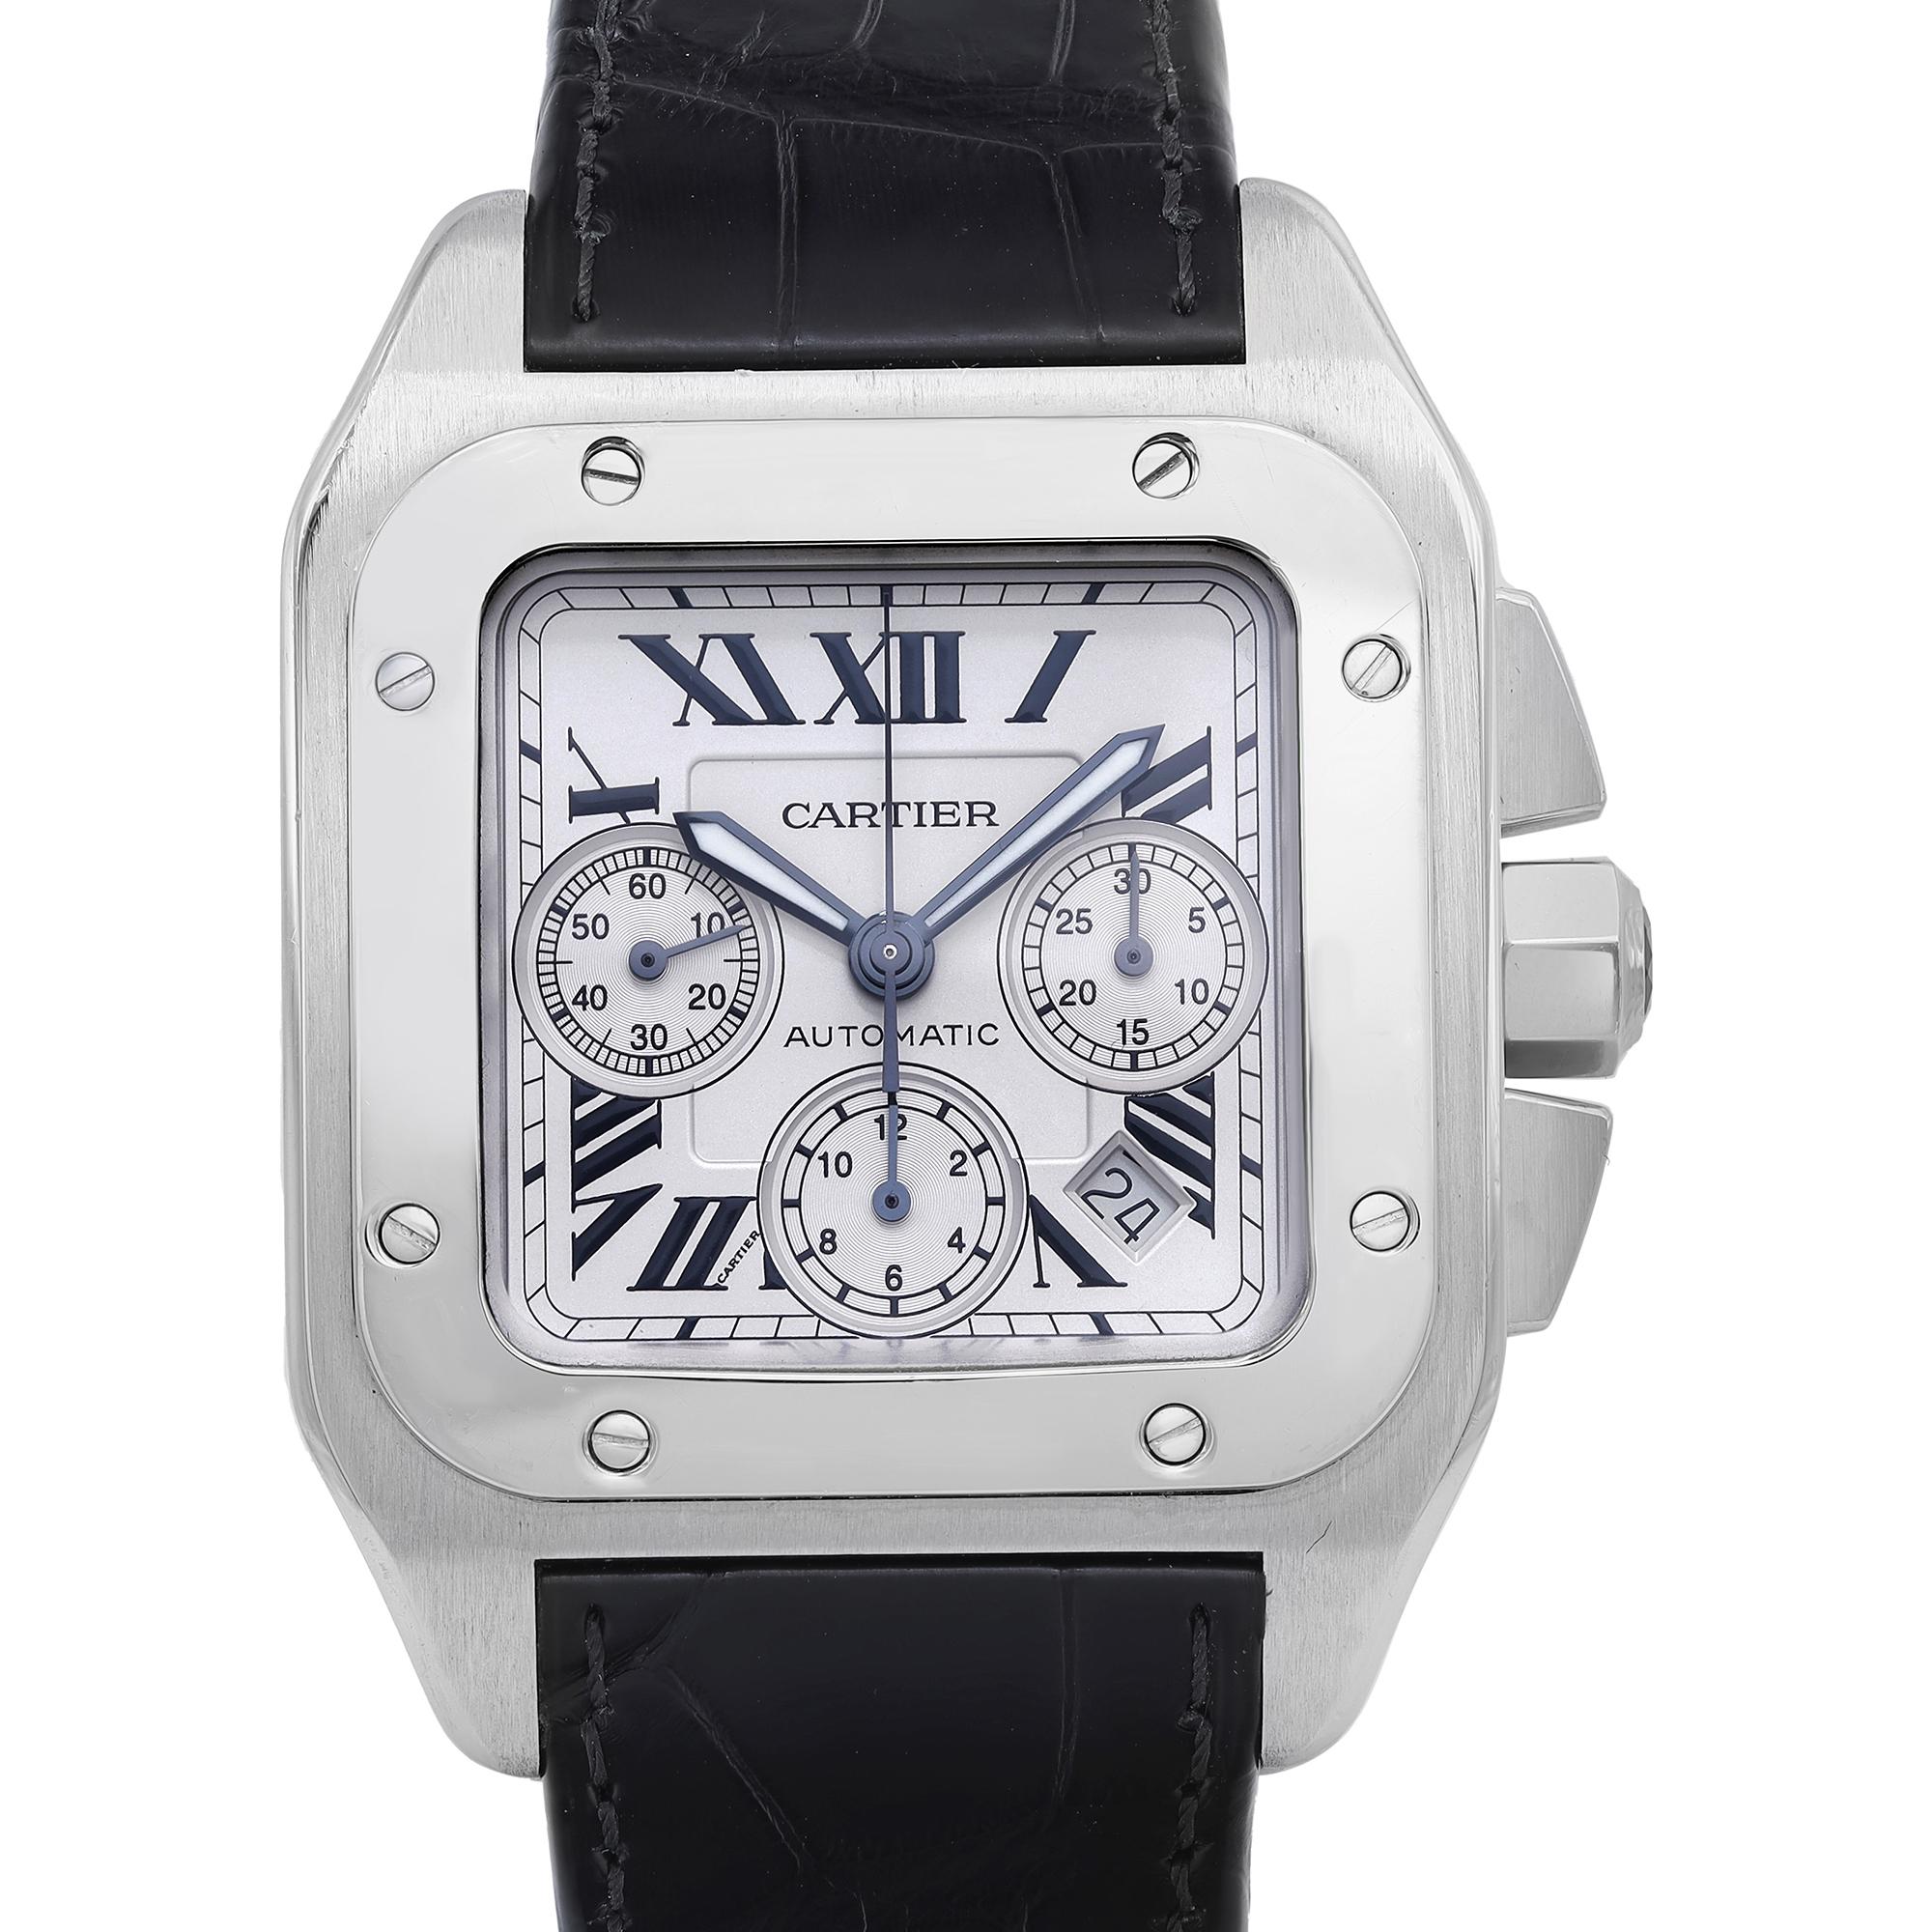 Pre-owned Cartier Santos 100 XL Steel Chronograph Silver Dial Automatic Watch W20090X8. The leather band of this watch is brand new. No Original Box and Papers are Included. Comes with Chronostore Presentation Box and Authenticity Card. Covered by